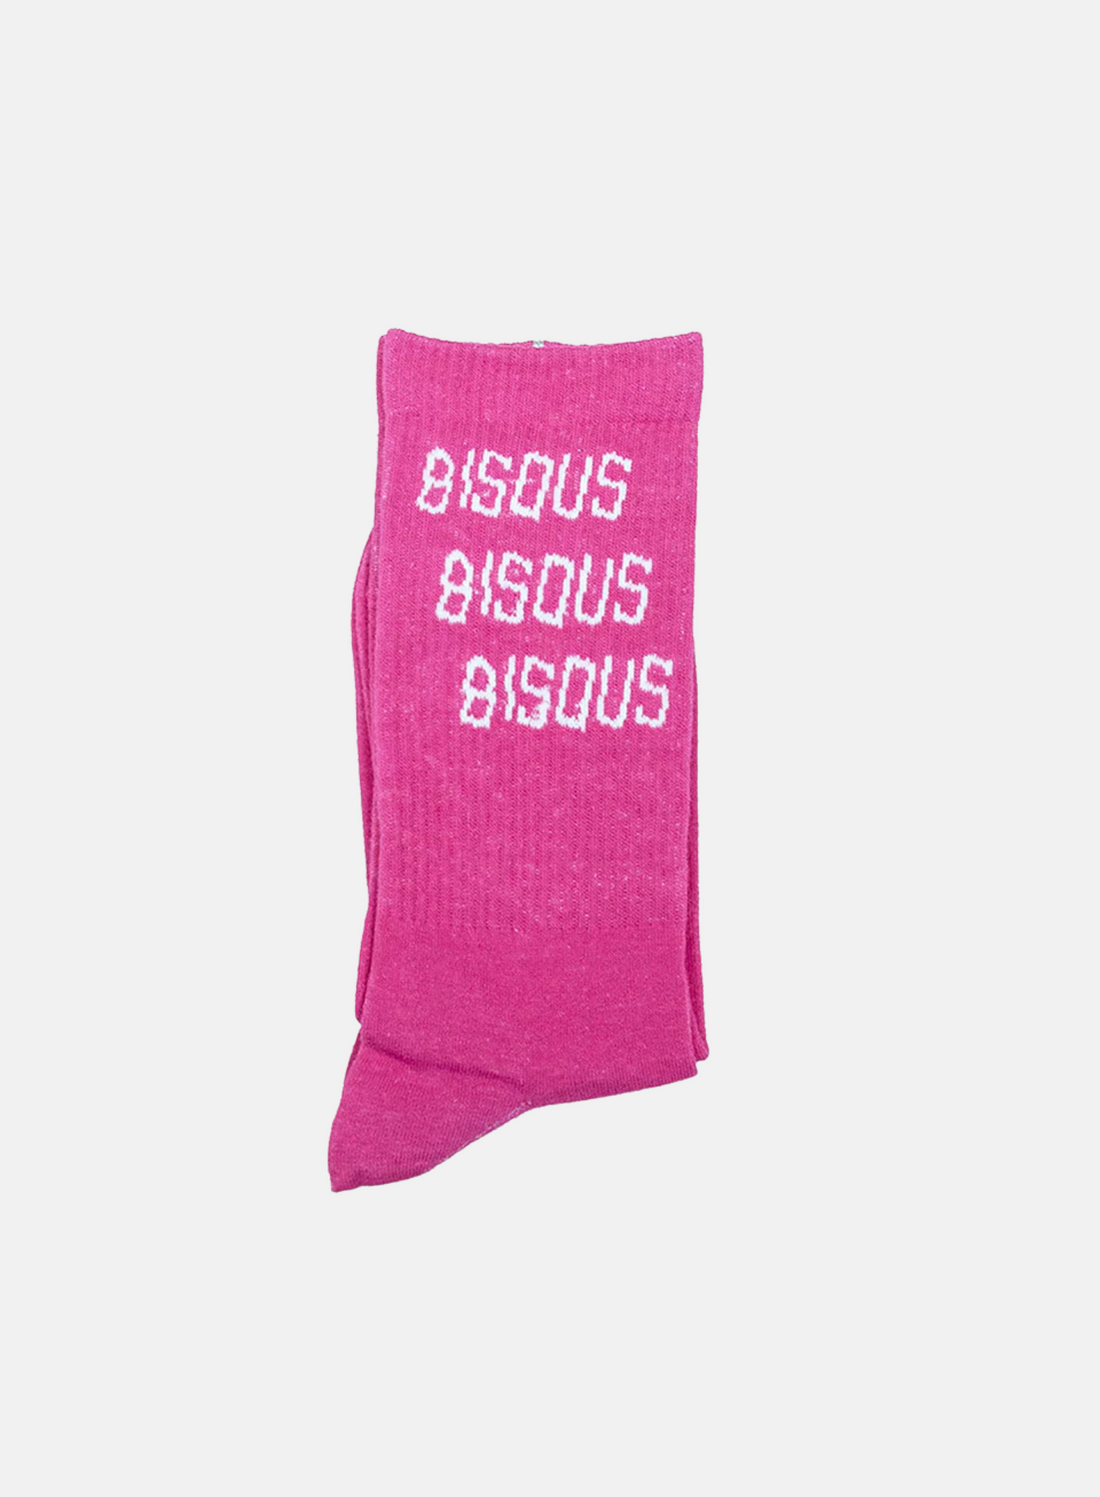 BISOUS SKATEBOARDS Bisous Socks Pink - Hympala Store 